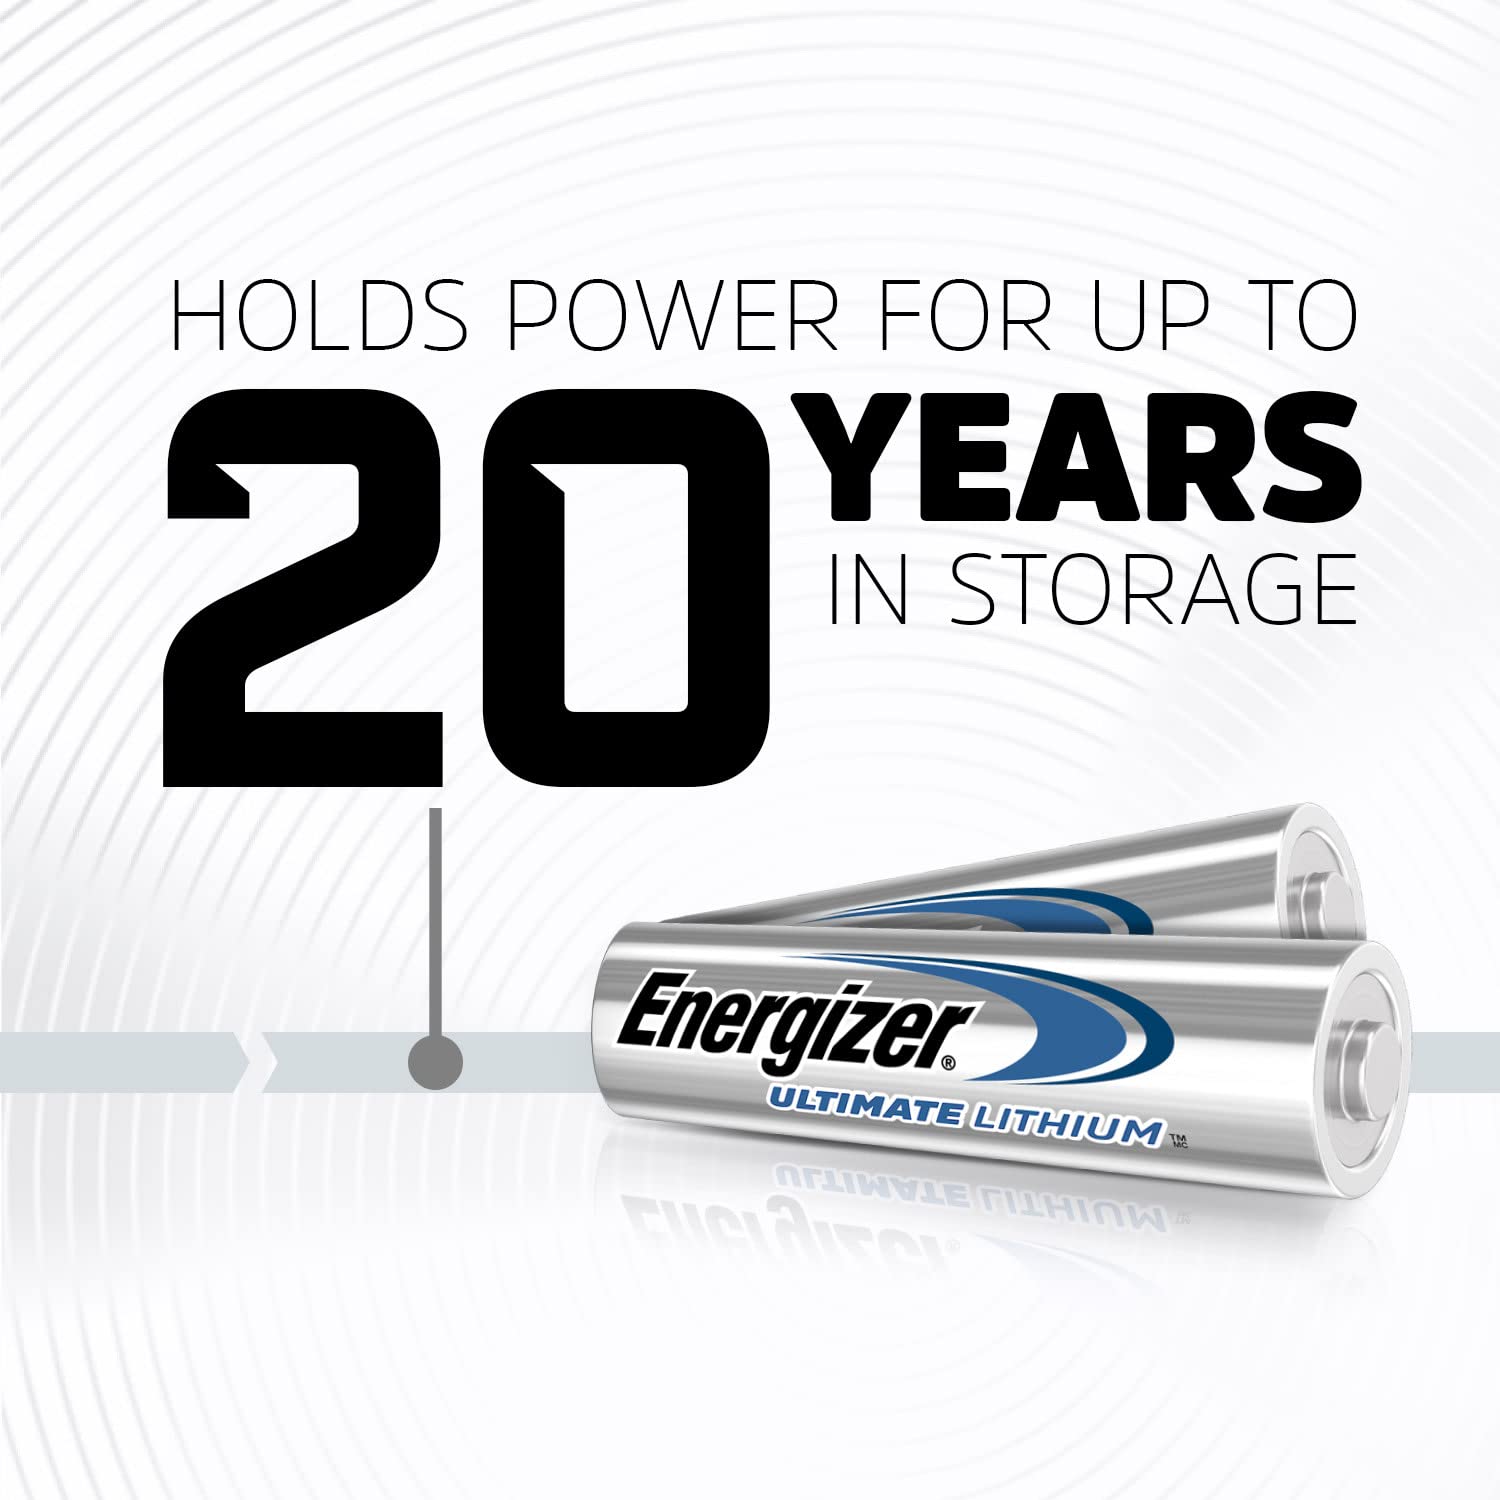 Energizer AA Batteries, Ultimate Double A Battery Lithium, 12 Count